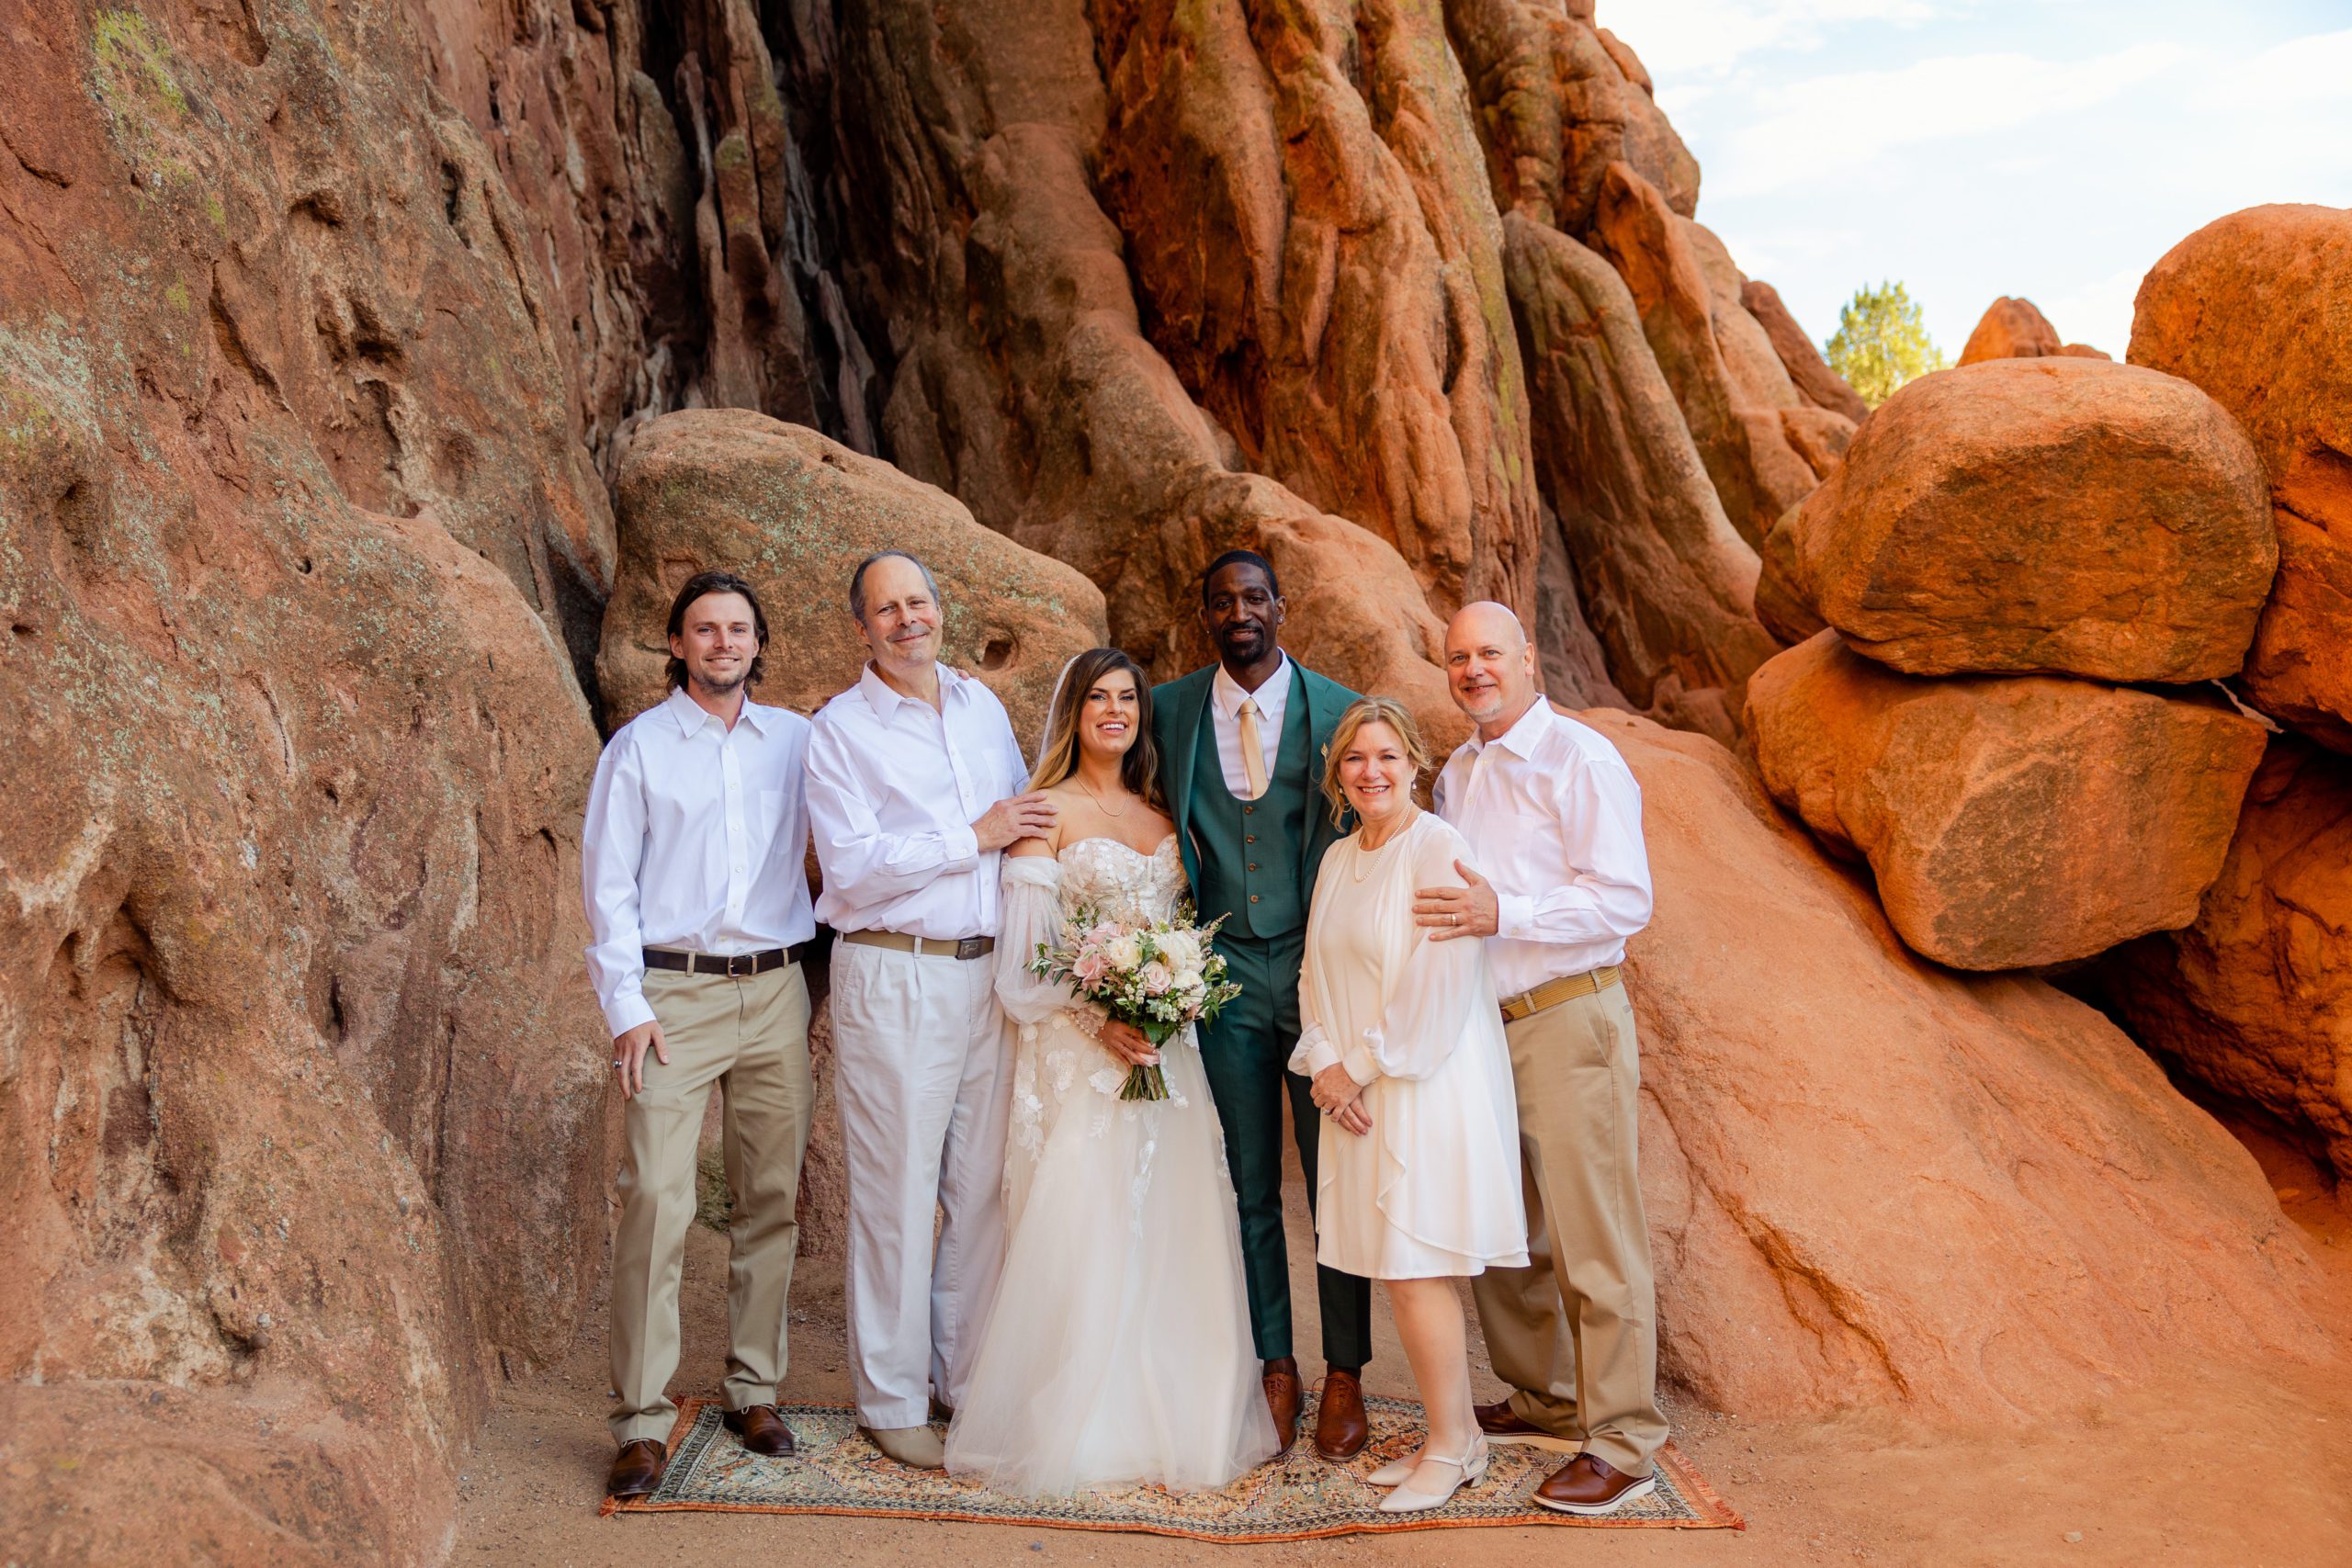 A family portrait with the bride's family at the Garden of the Gods.